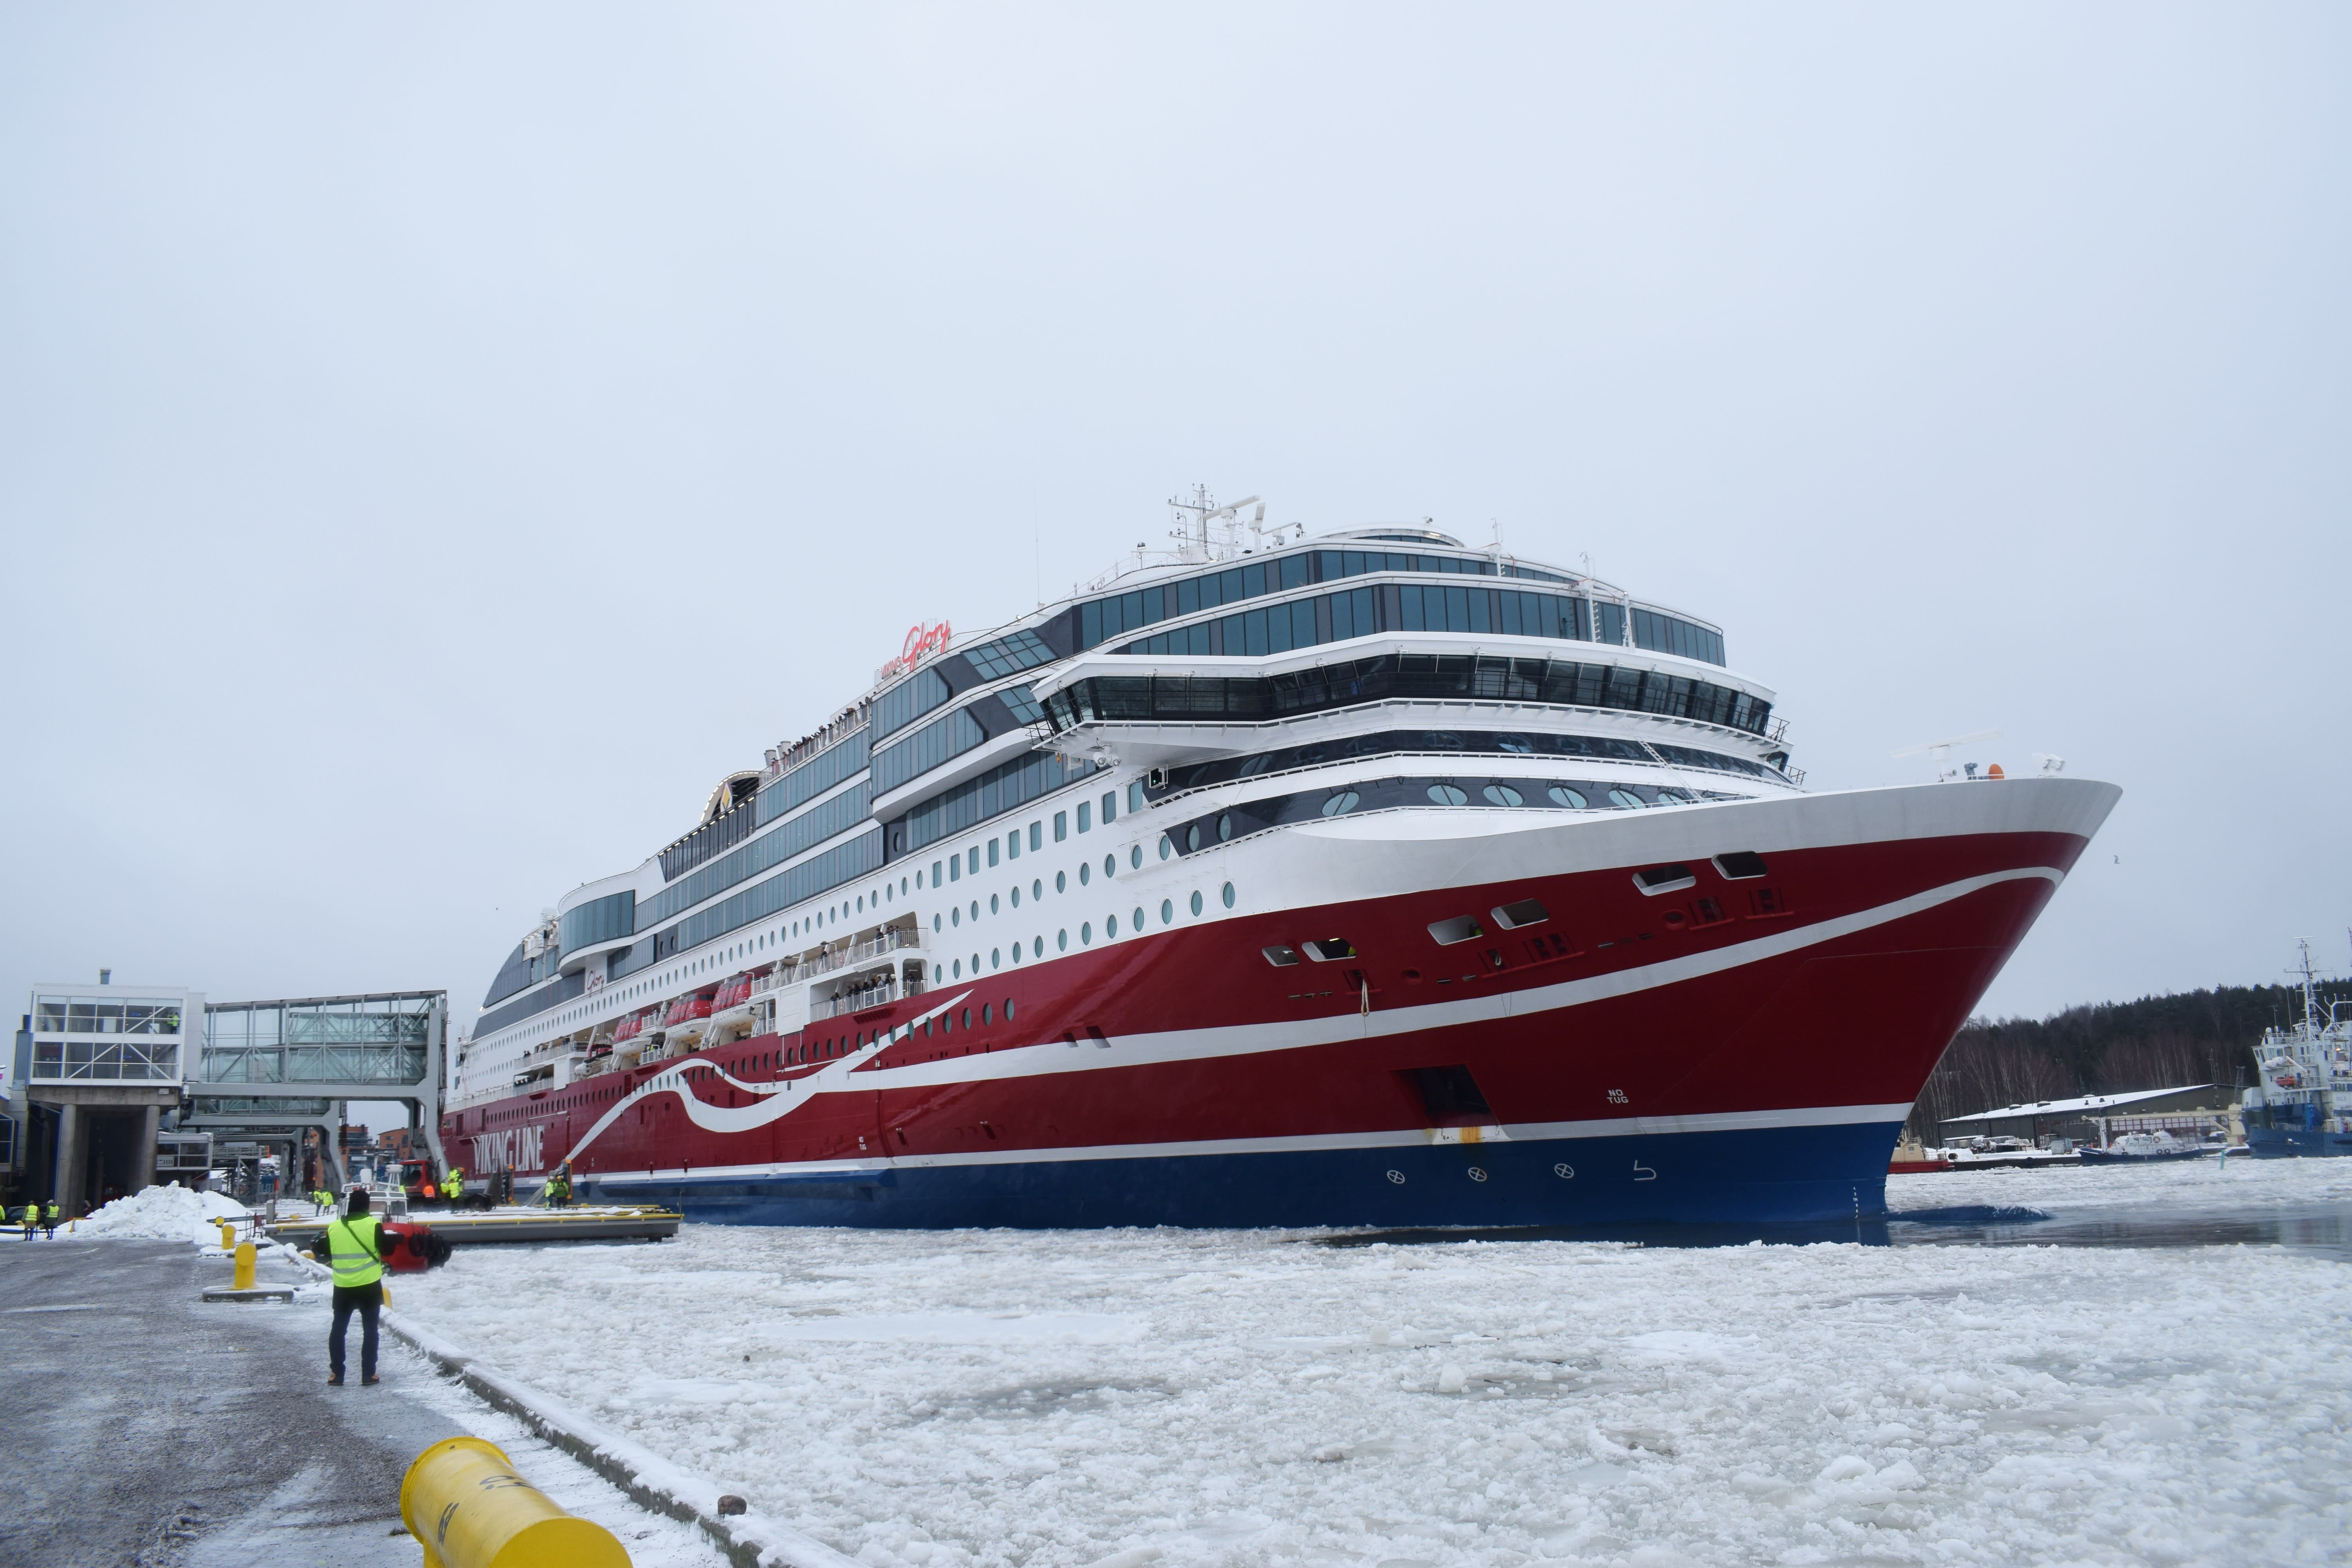 Viking Line ferry tickets include a fuel surcharge